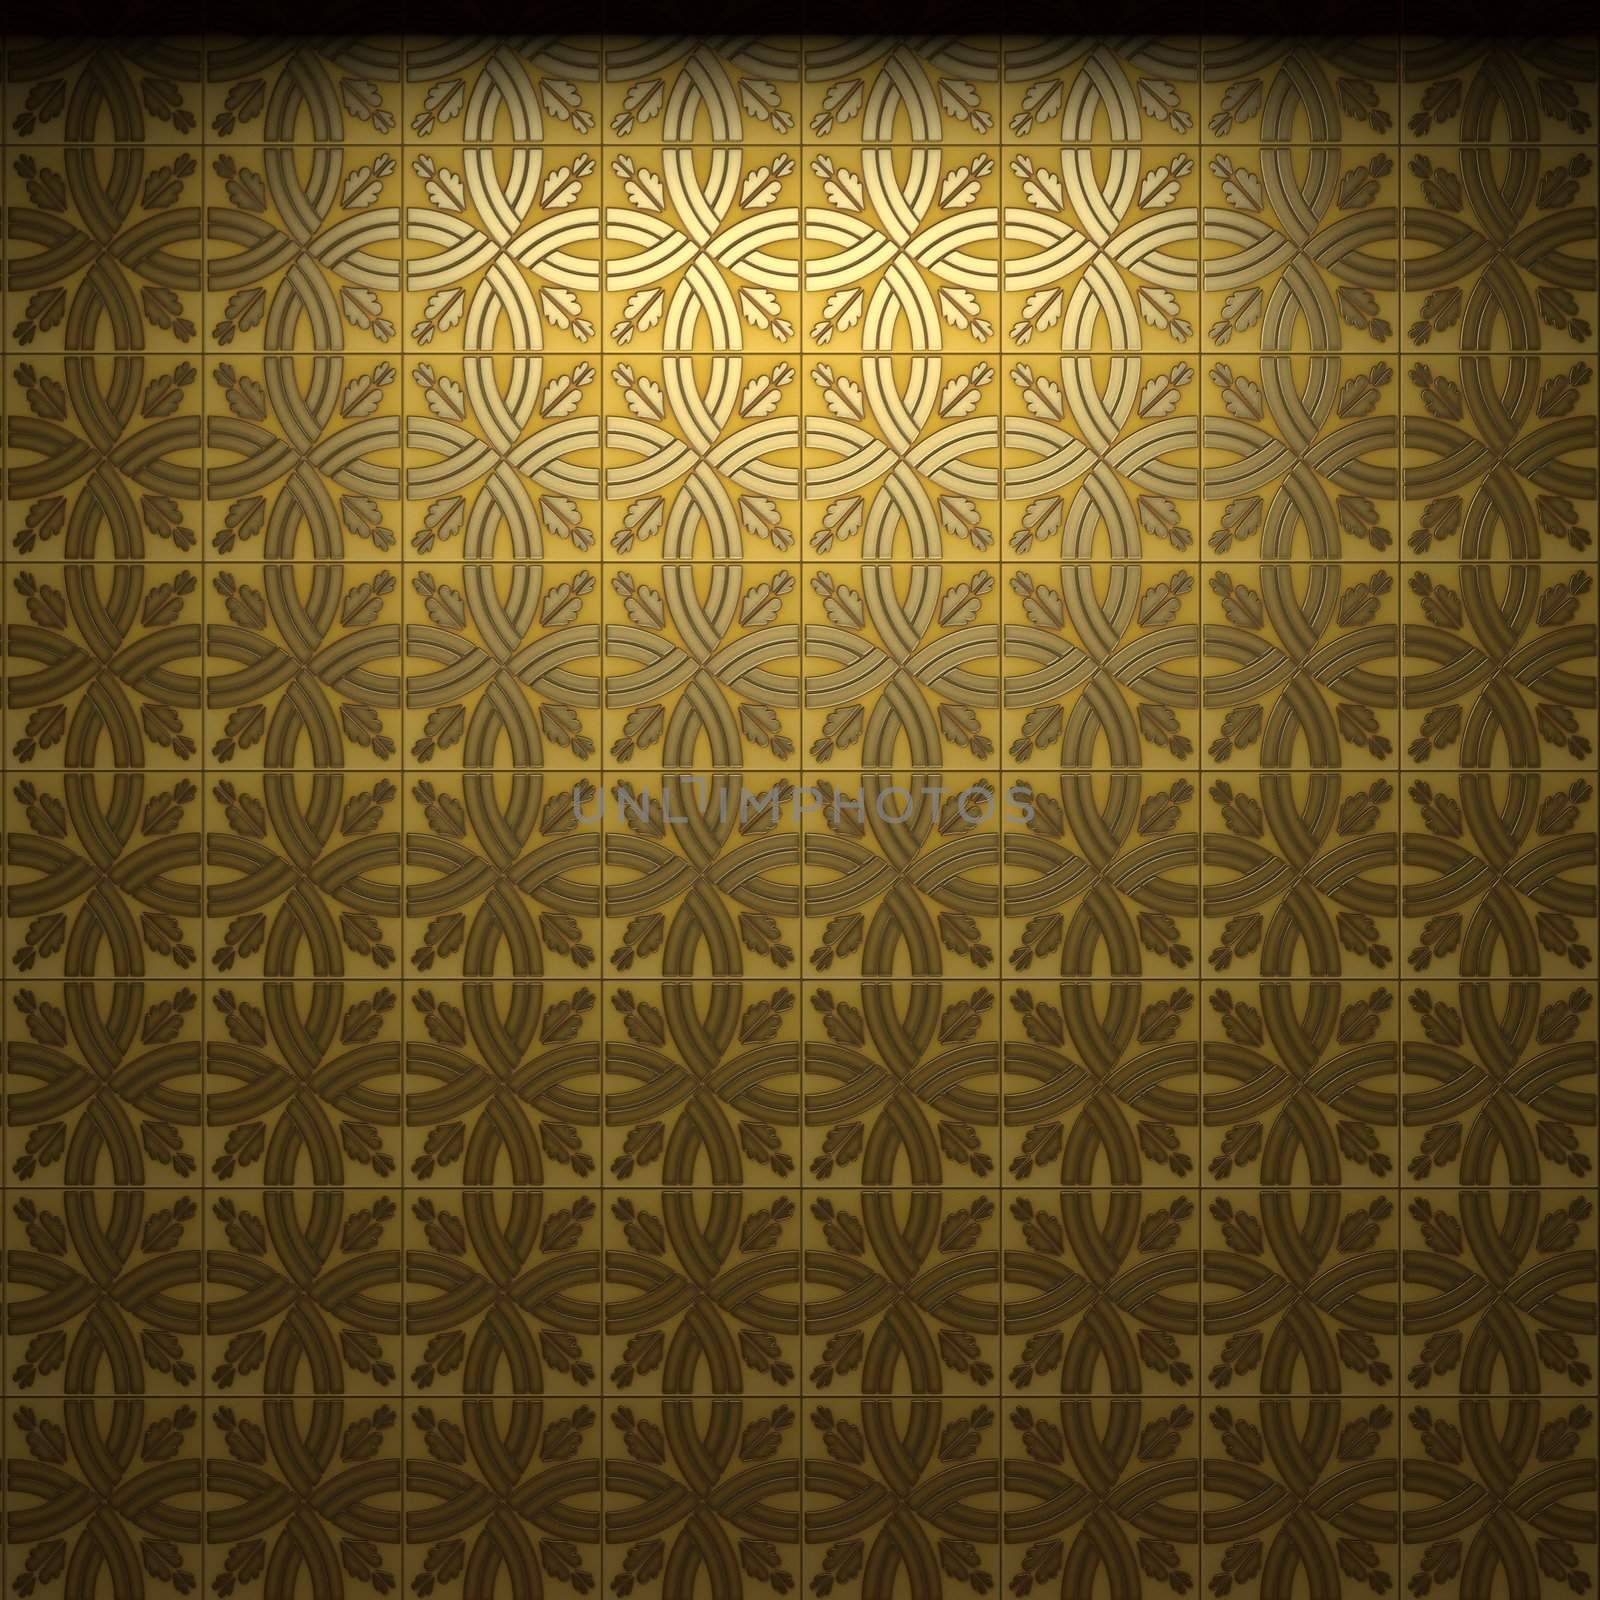 illuminated tile wall made in 3D graphics